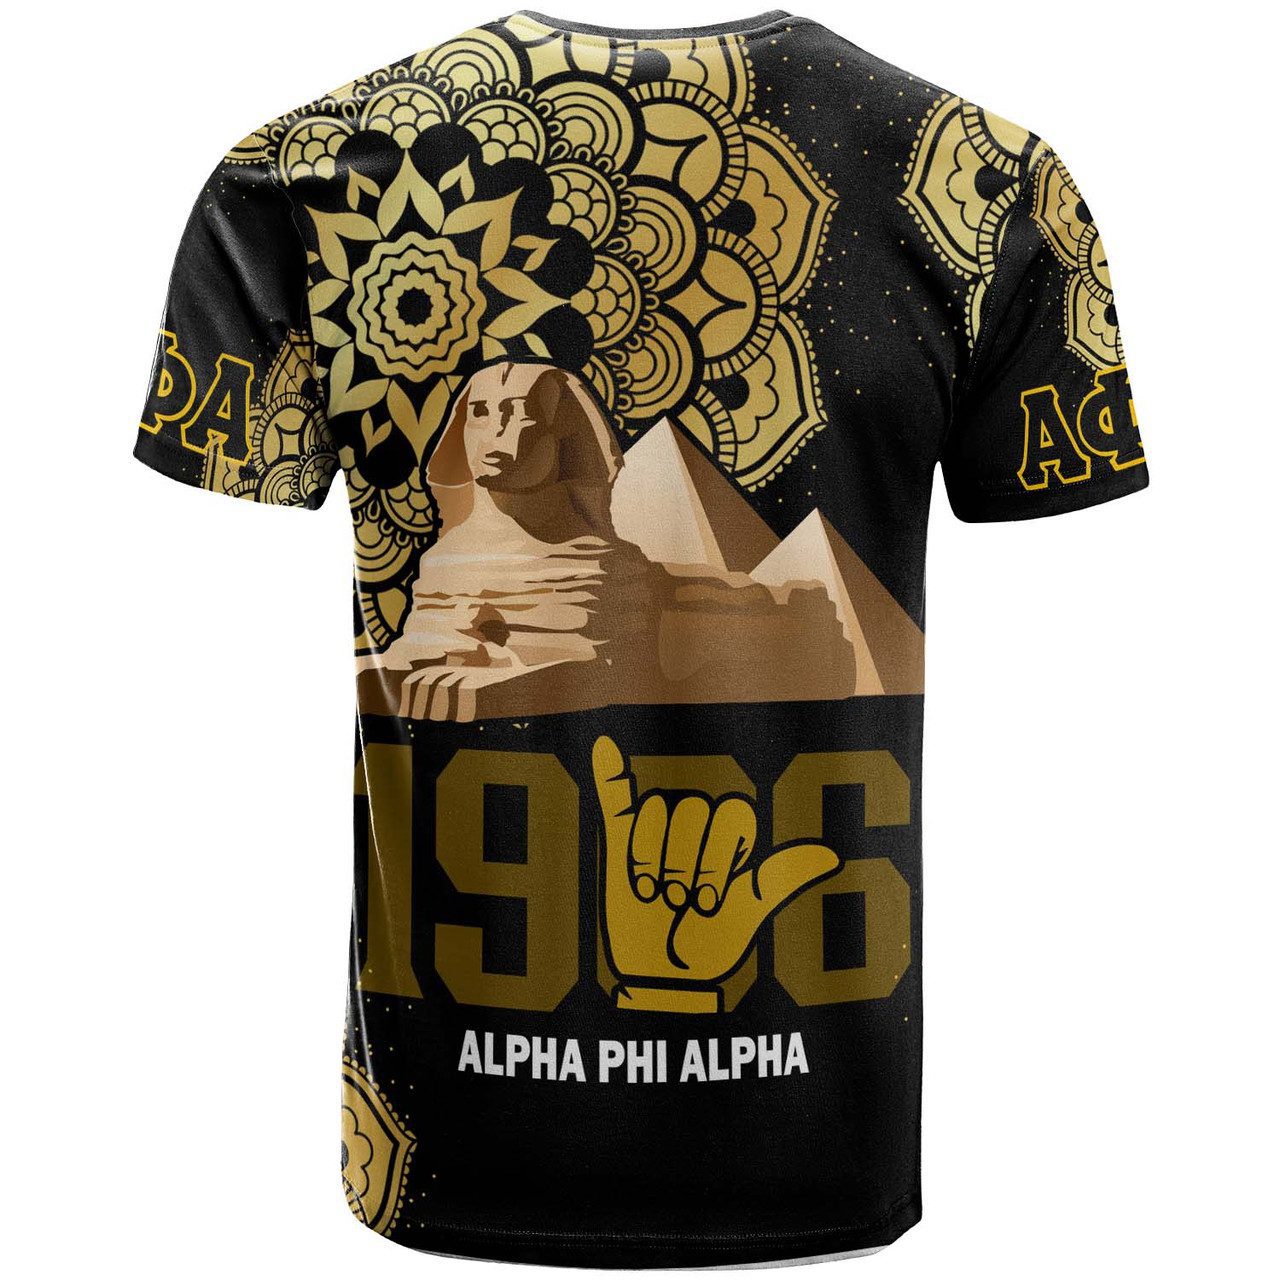 Alpha Phi Alpha T-shirt – Fraternity Hand Sign with Kong 1906 and Mandala Pattern T-shirt